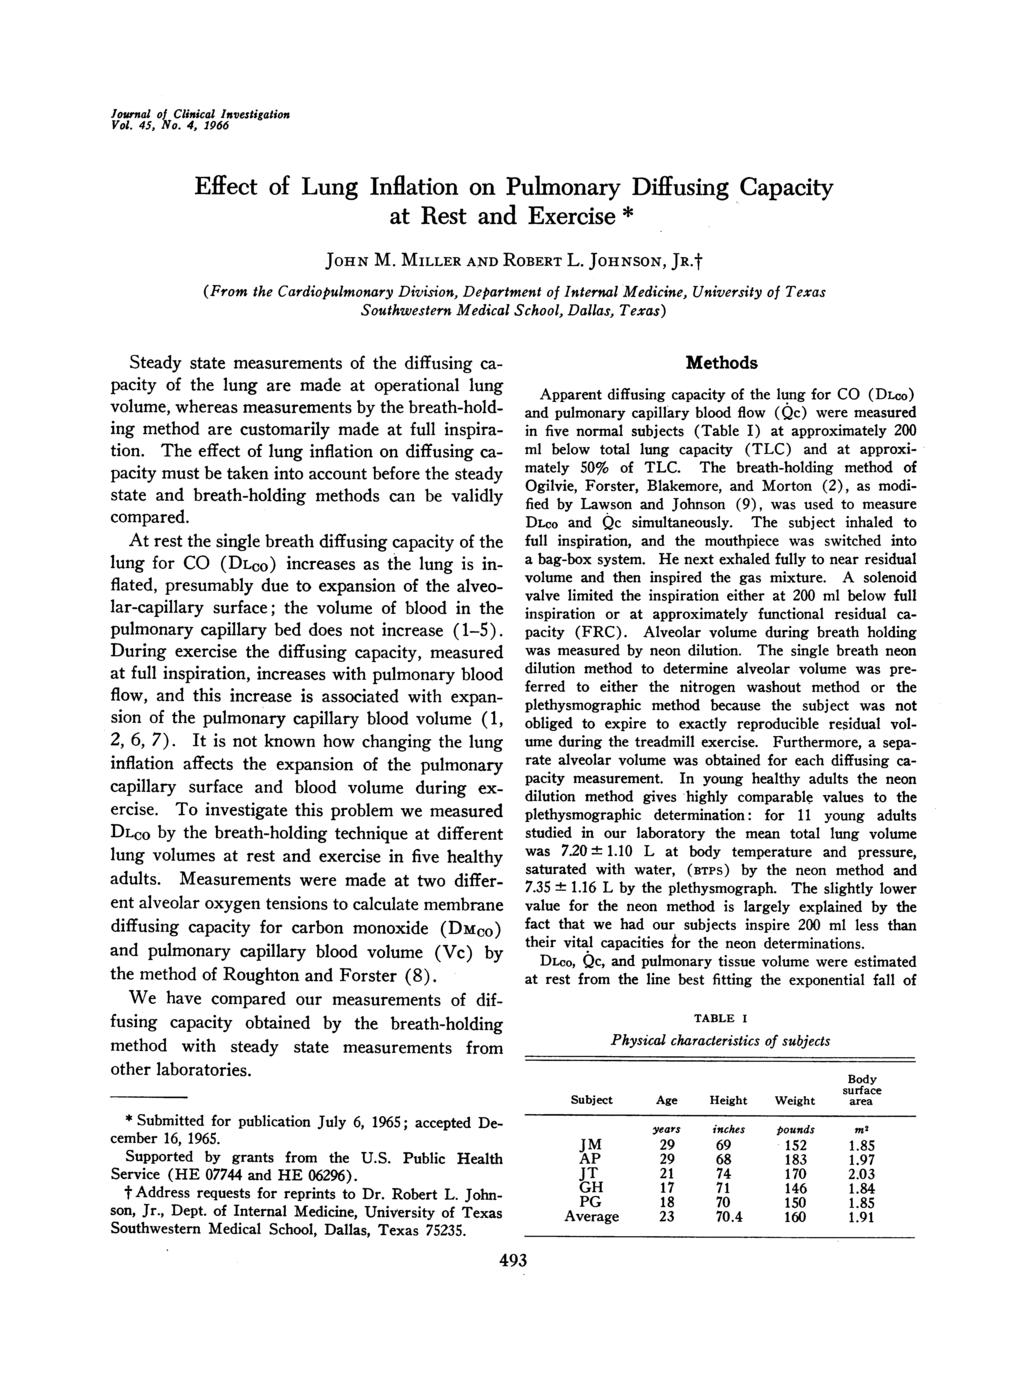 Journal of Clinical Investigation Vol. 45, No. 4, 1966 Effect of Lung Inflation on Pulmonary Diffusing Capacity at Rest and Exercise * JOHN M. MILLER AND ROBERT L. JOHNSON, JR.